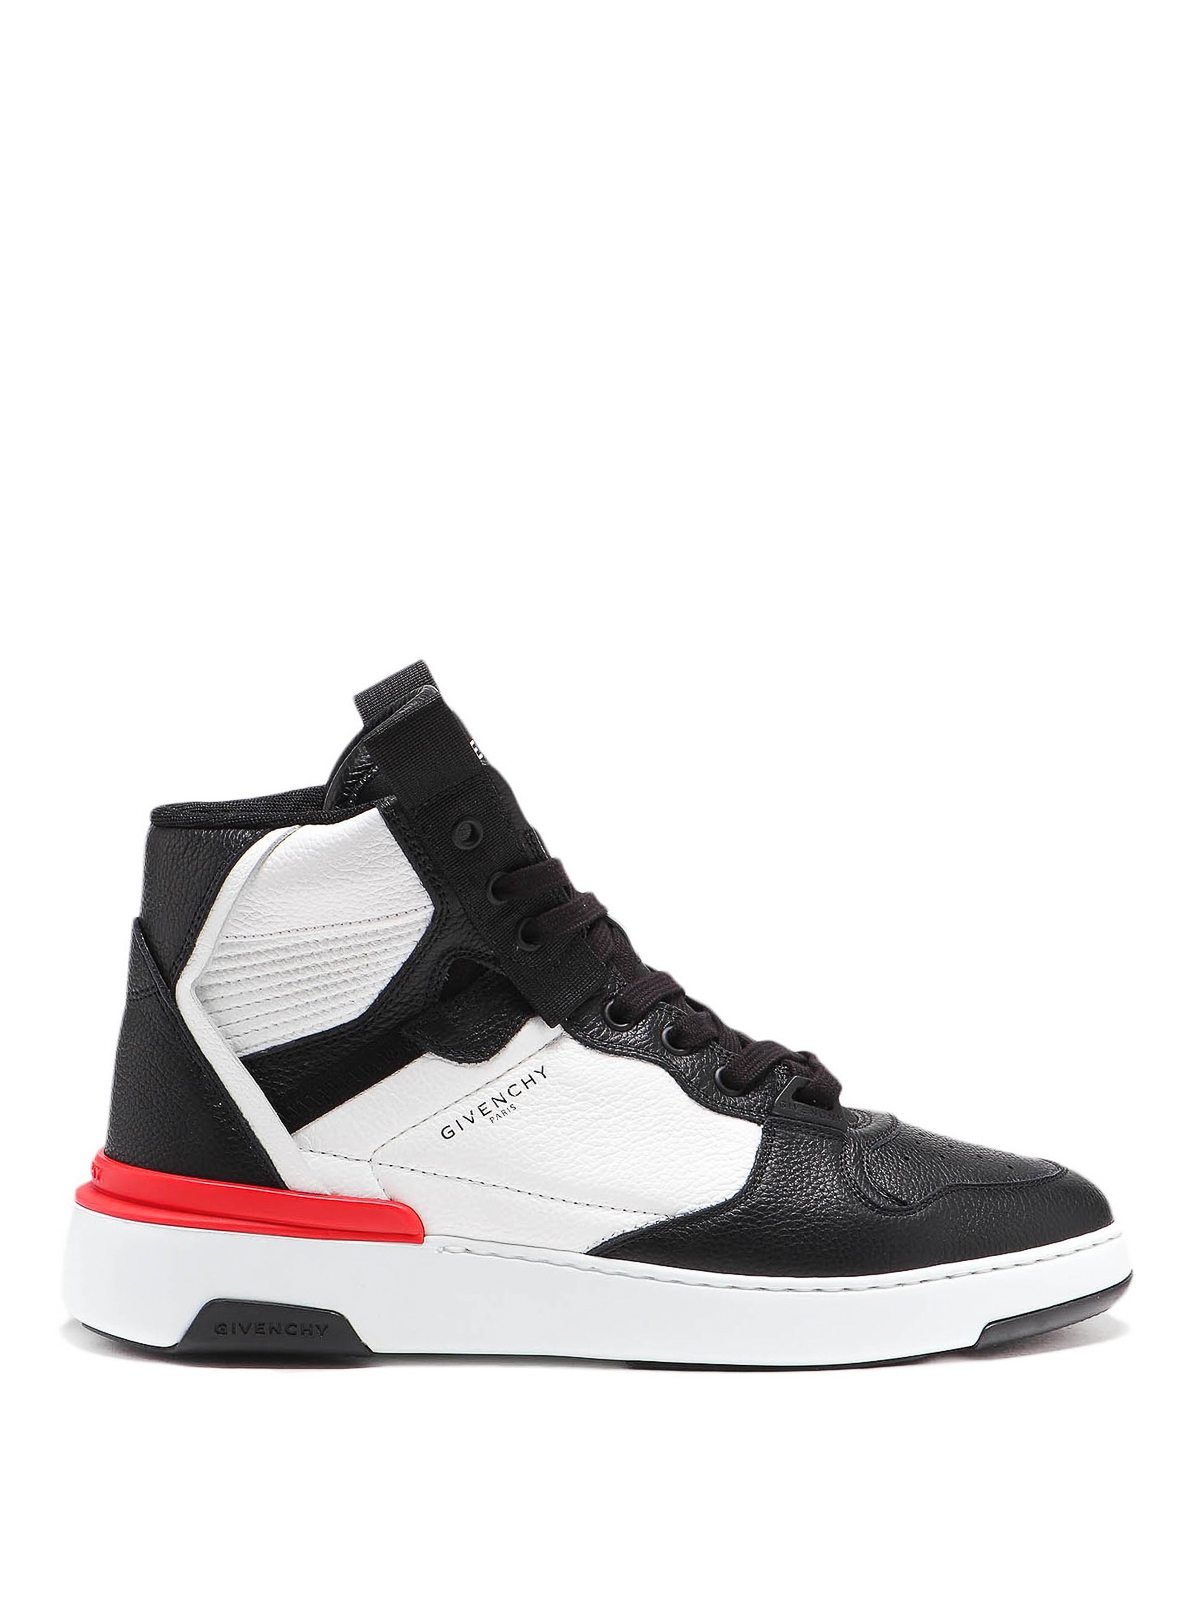 Trainers Givenchy - Wing leather high top sneakers - BH002JH0K6004